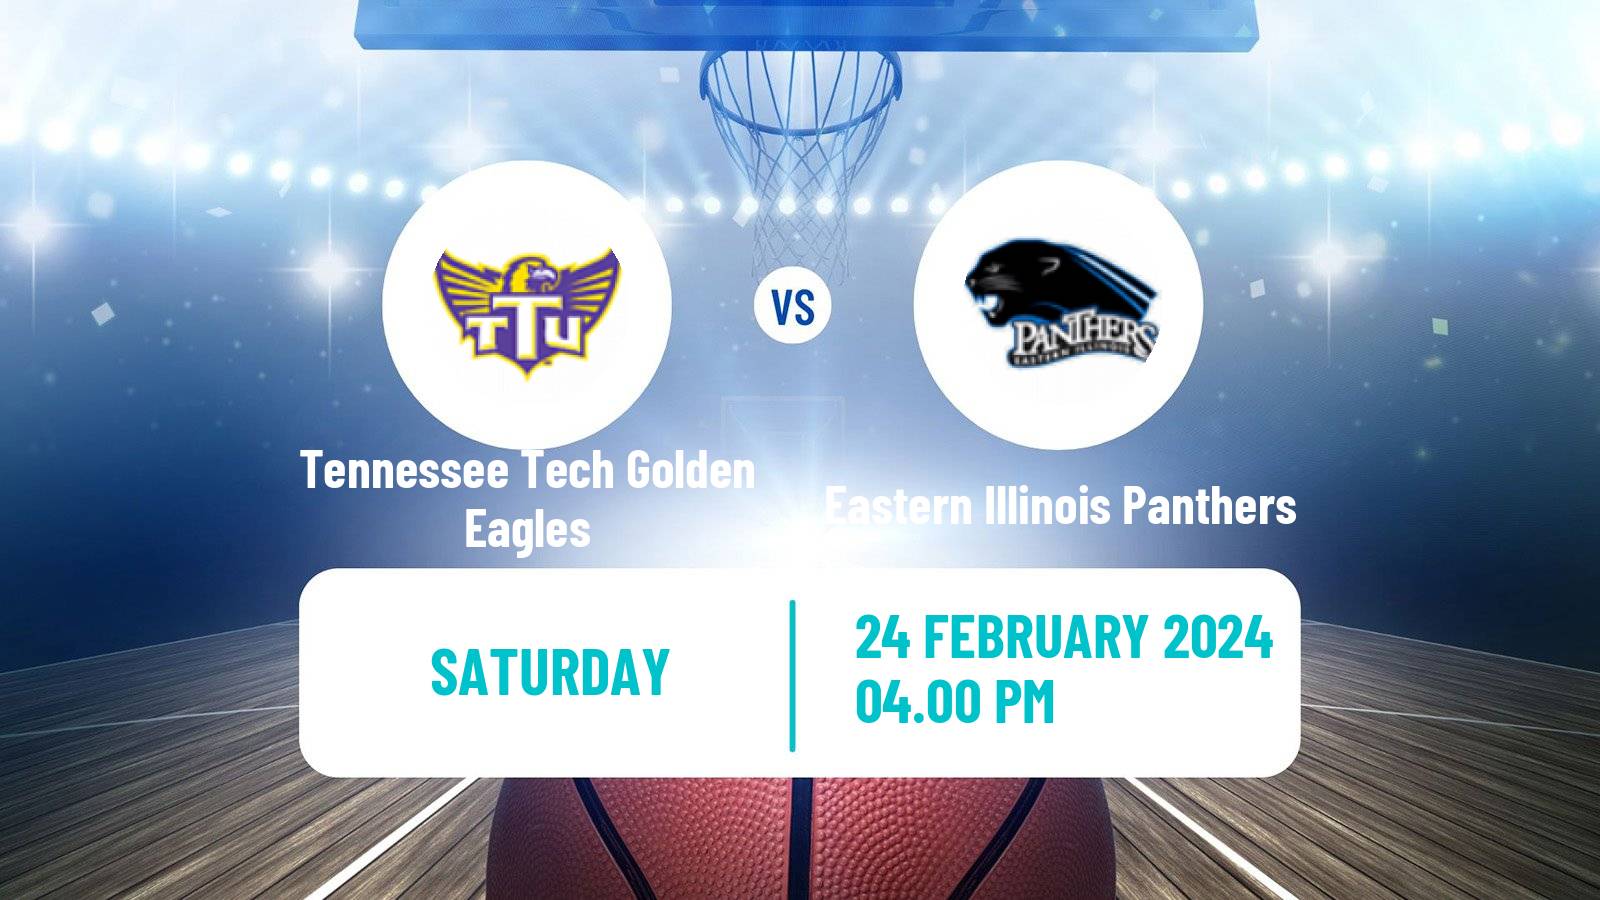 Basketball NCAA College Basketball Tennessee Tech Golden Eagles - Eastern Illinois Panthers